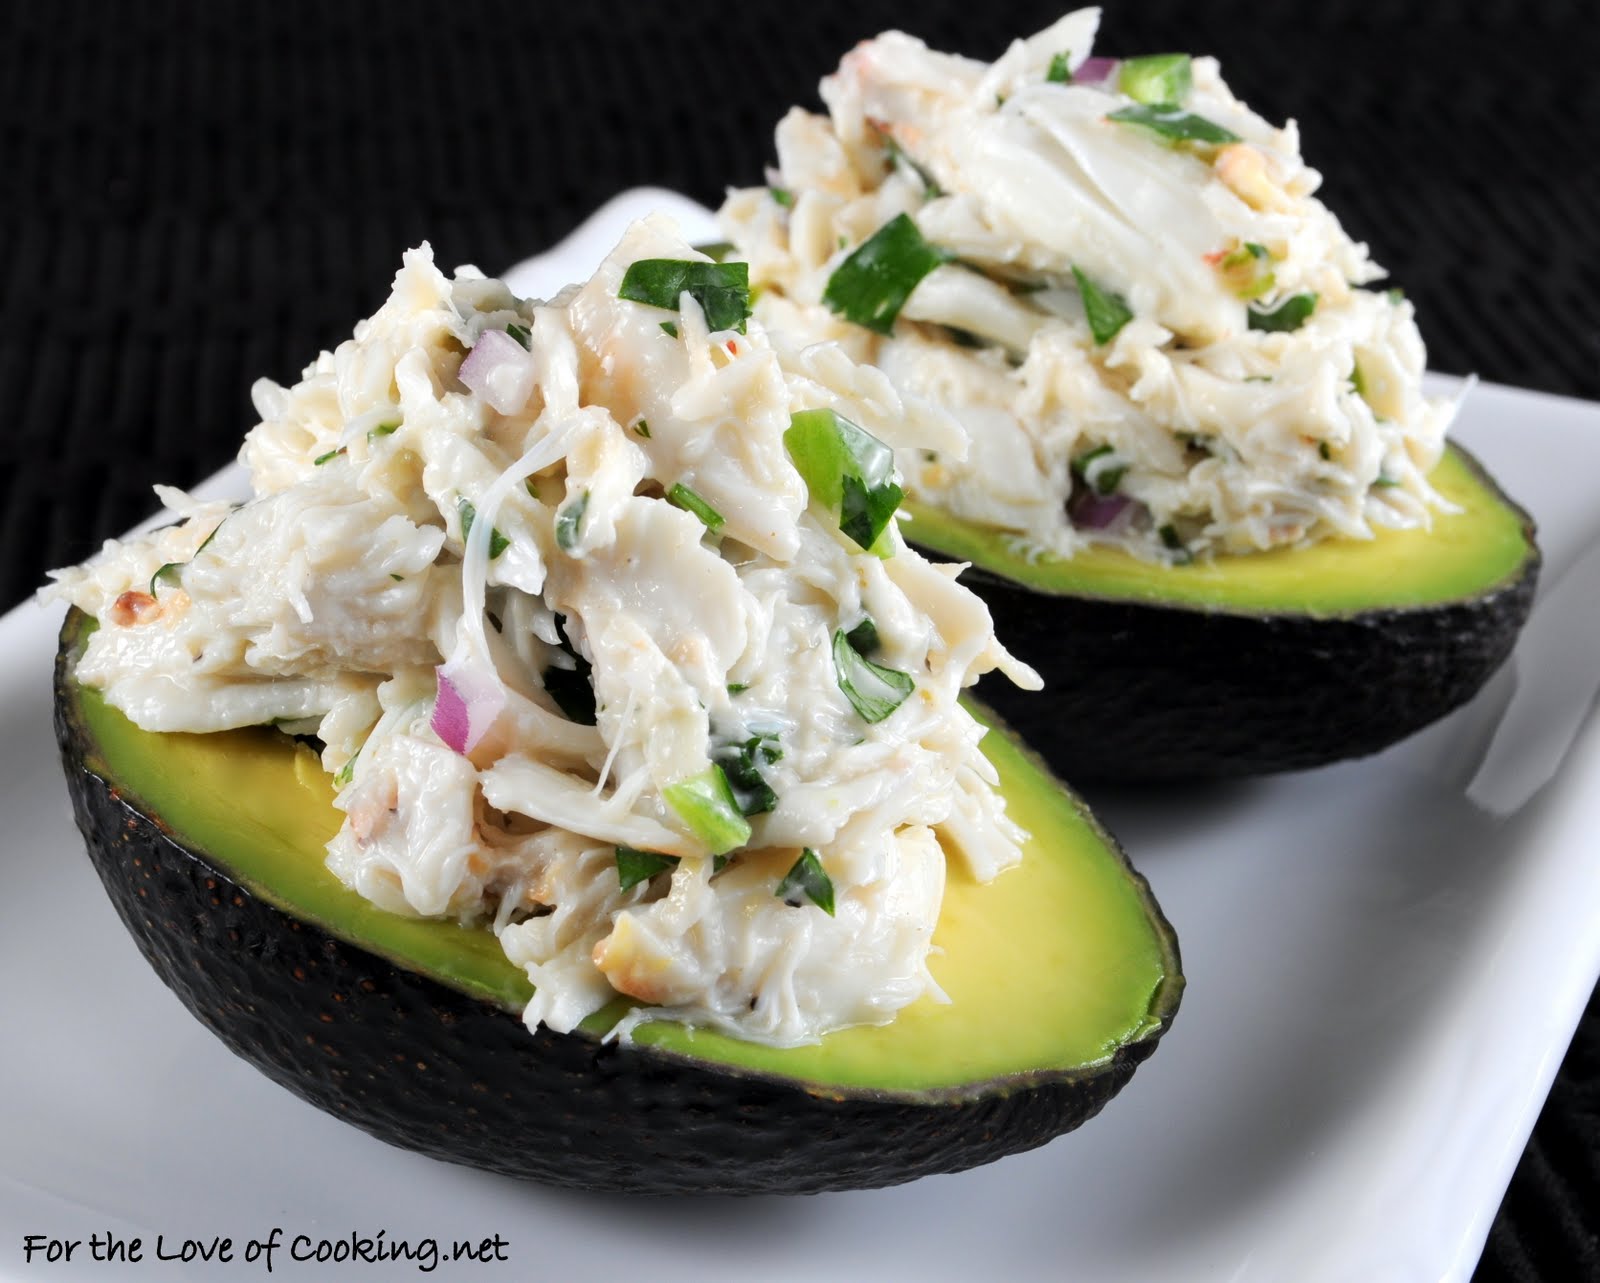 Cilantro and Lime Crab Salad in Avocado Halves | For the Love of Cooking